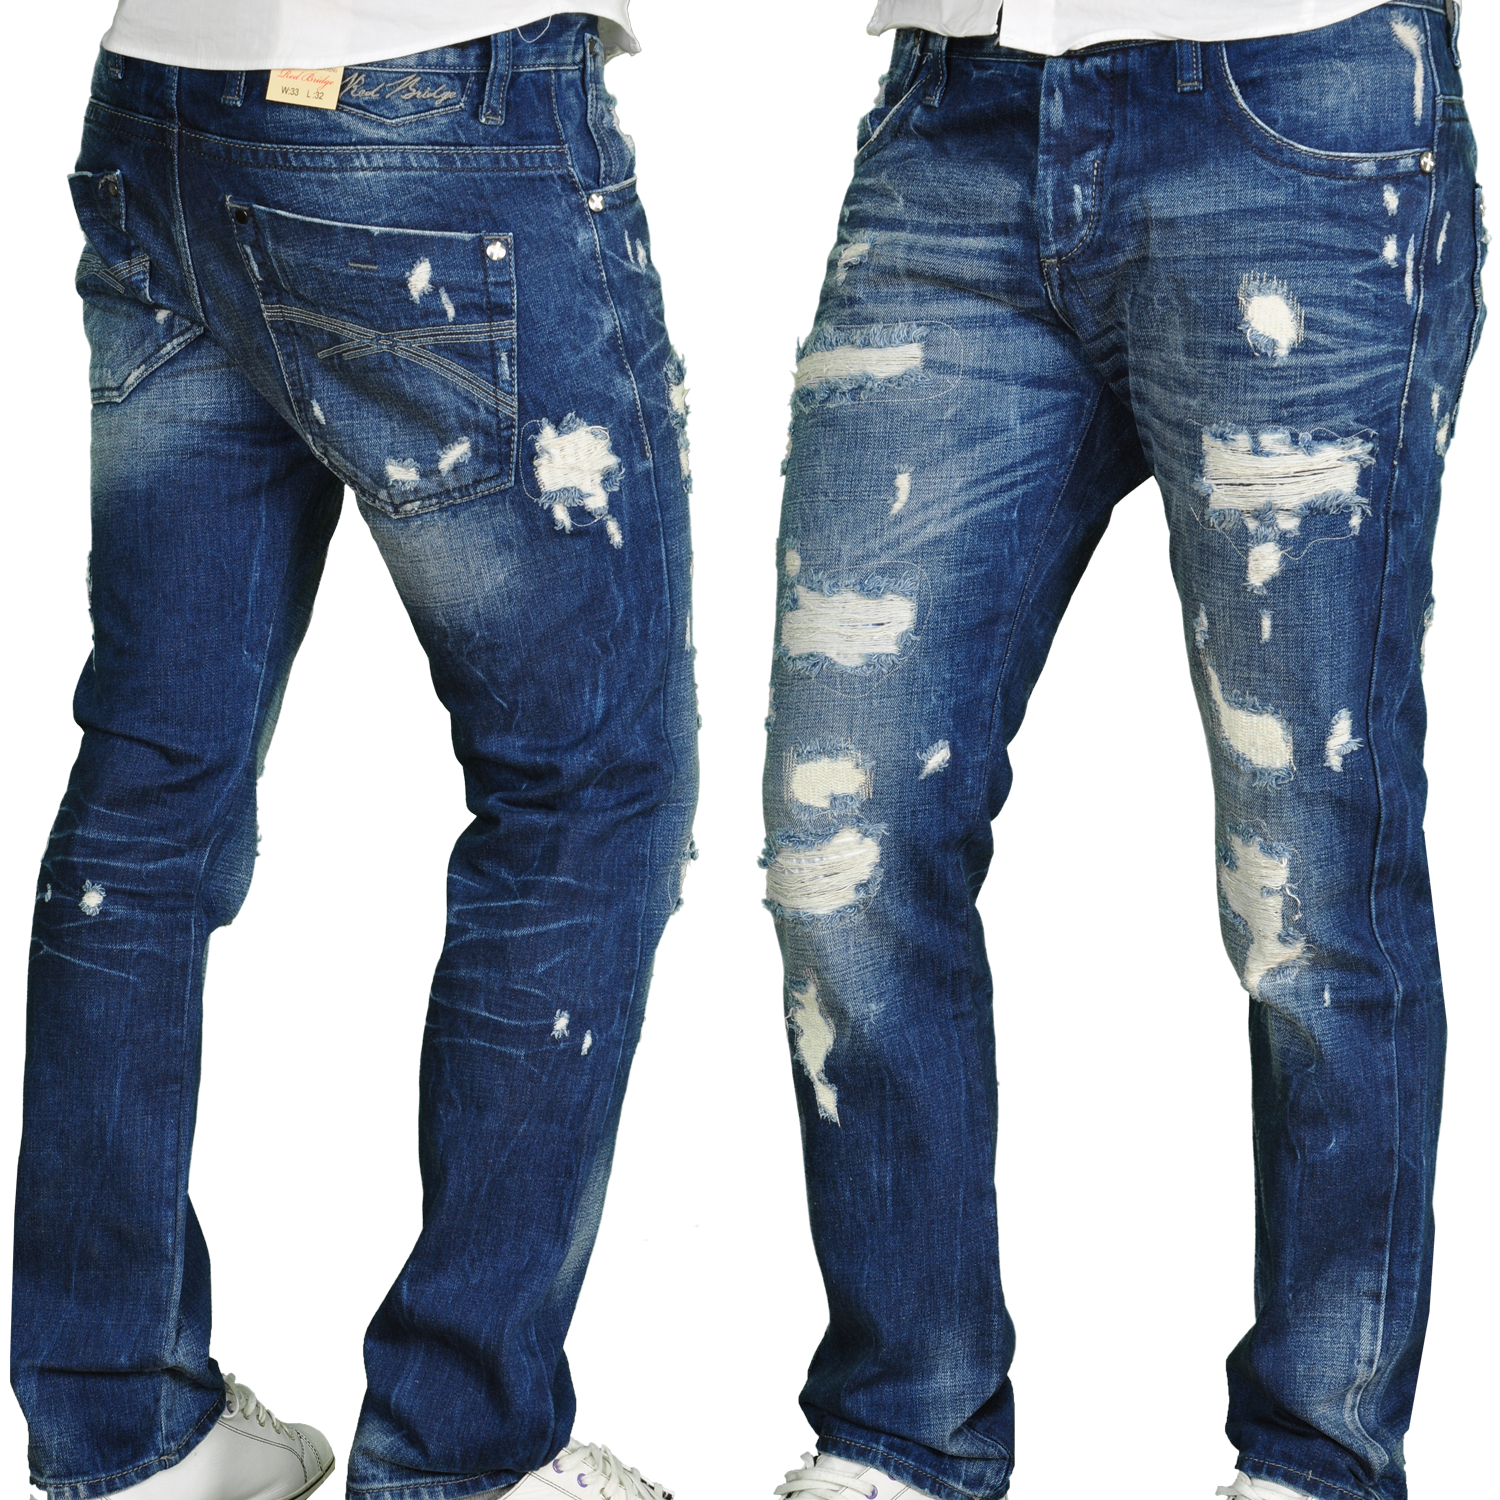 Jeans Pant Png Hd : Over 424 jeans png images are found on vippng. - bmp-1st